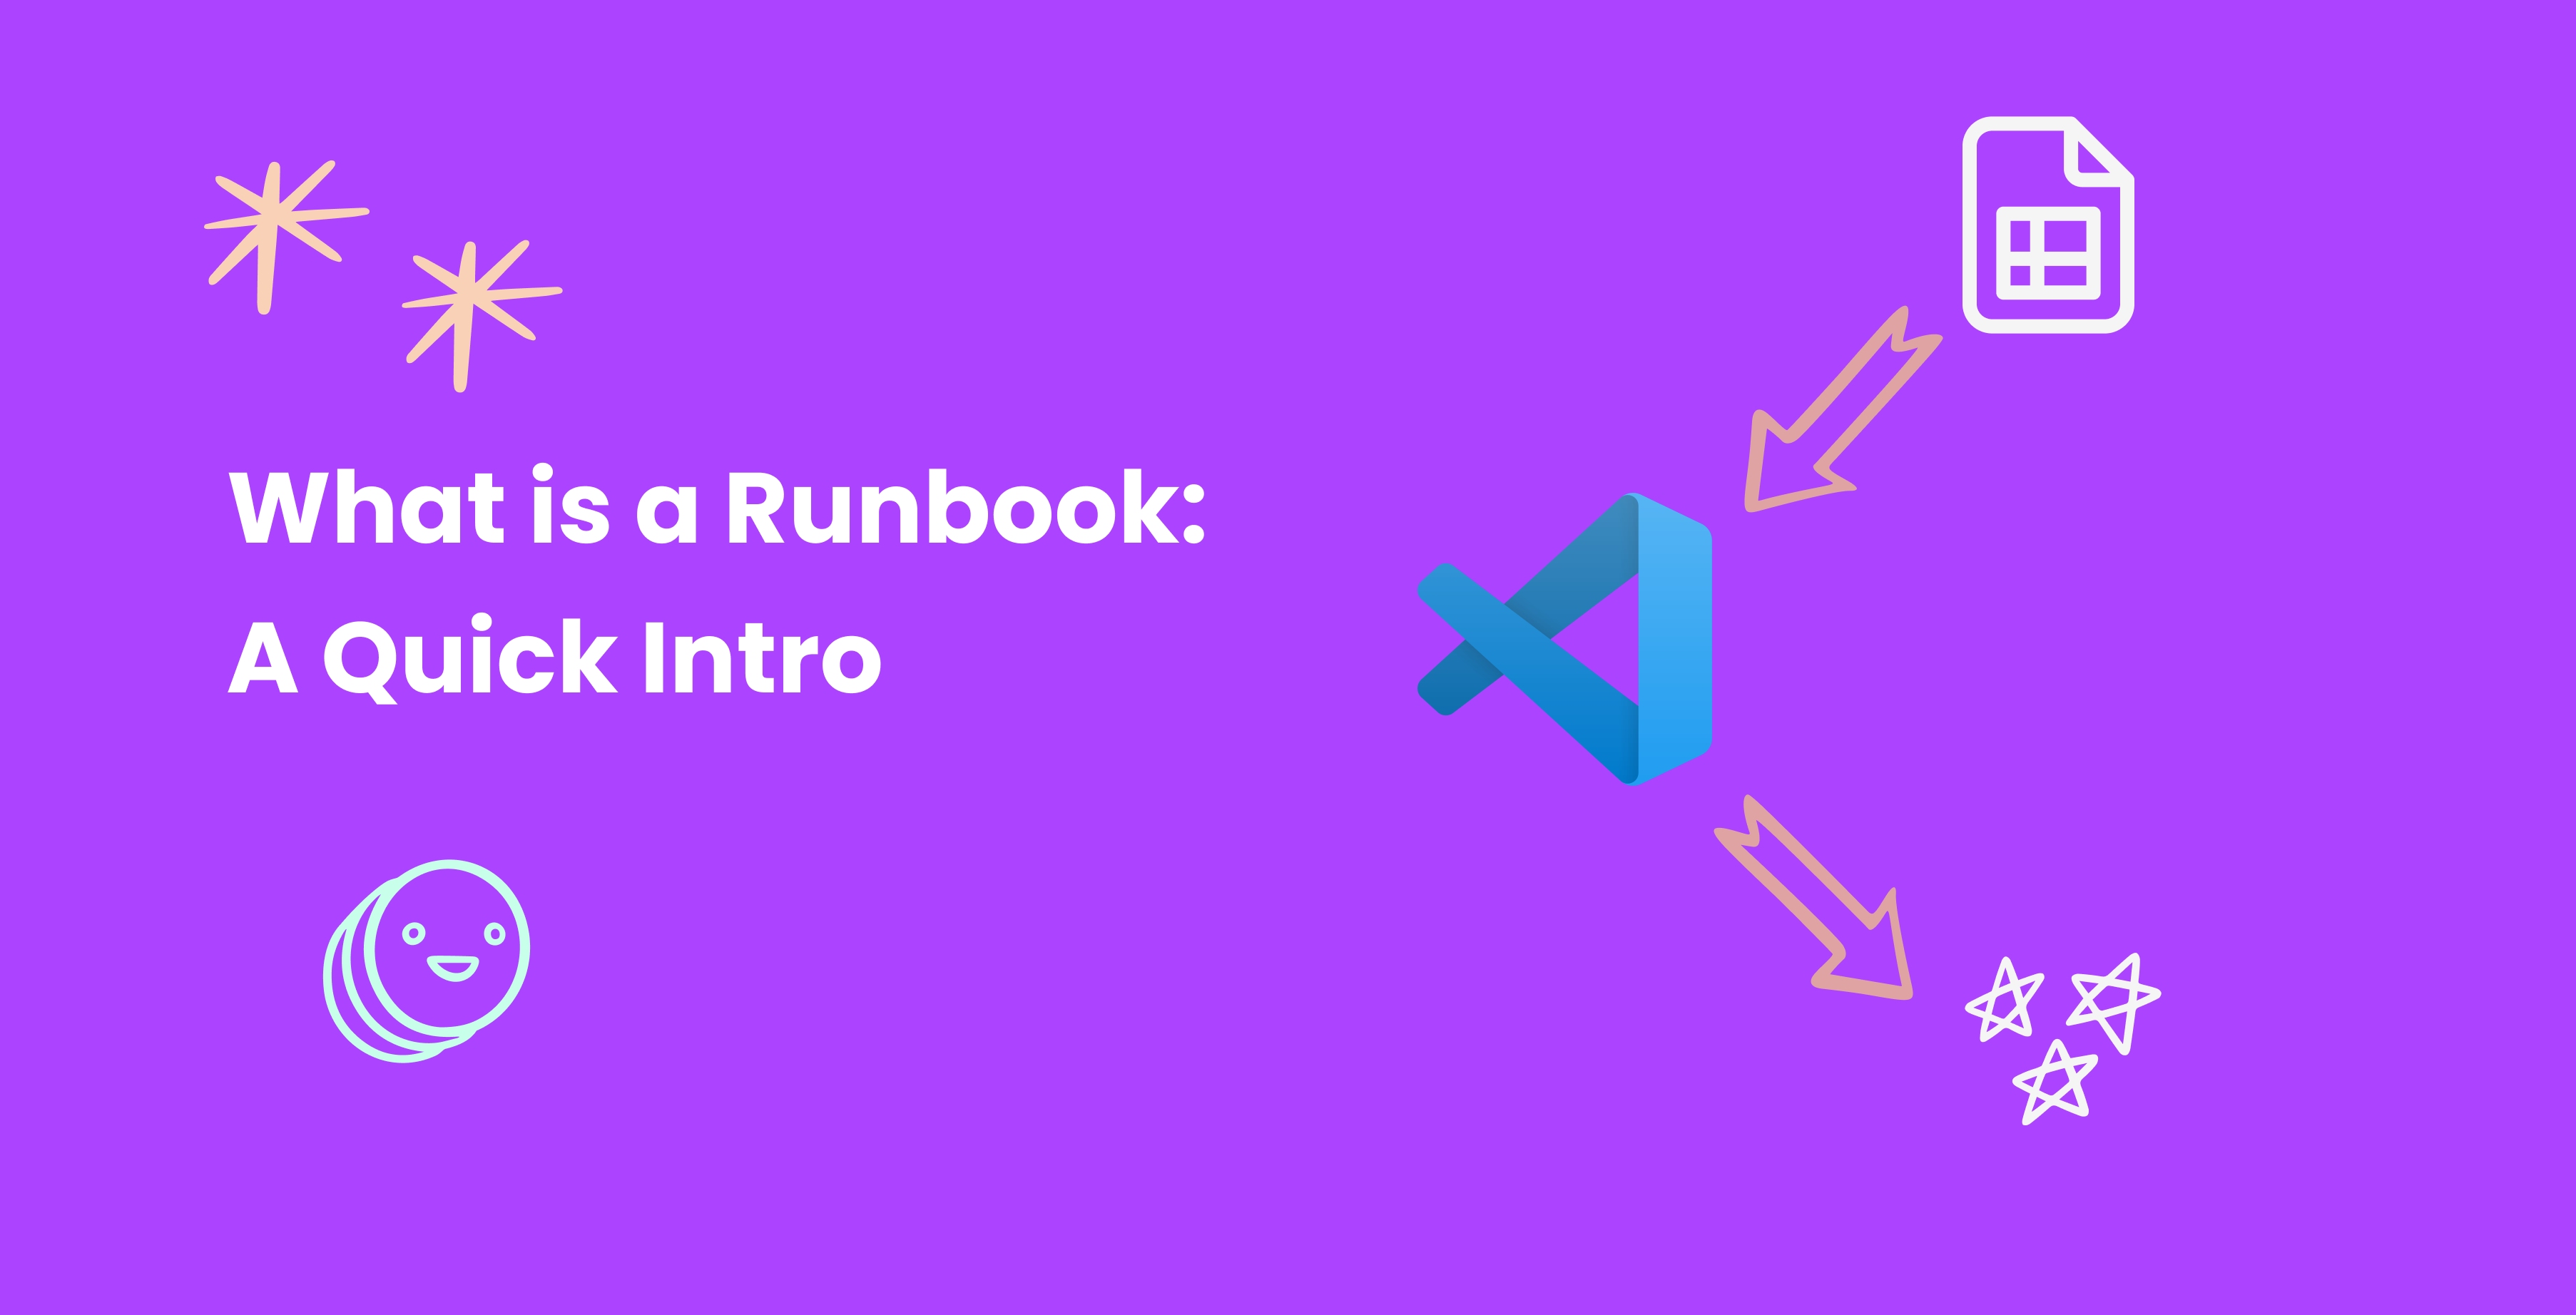 What is a Runbook: A Quick Intro